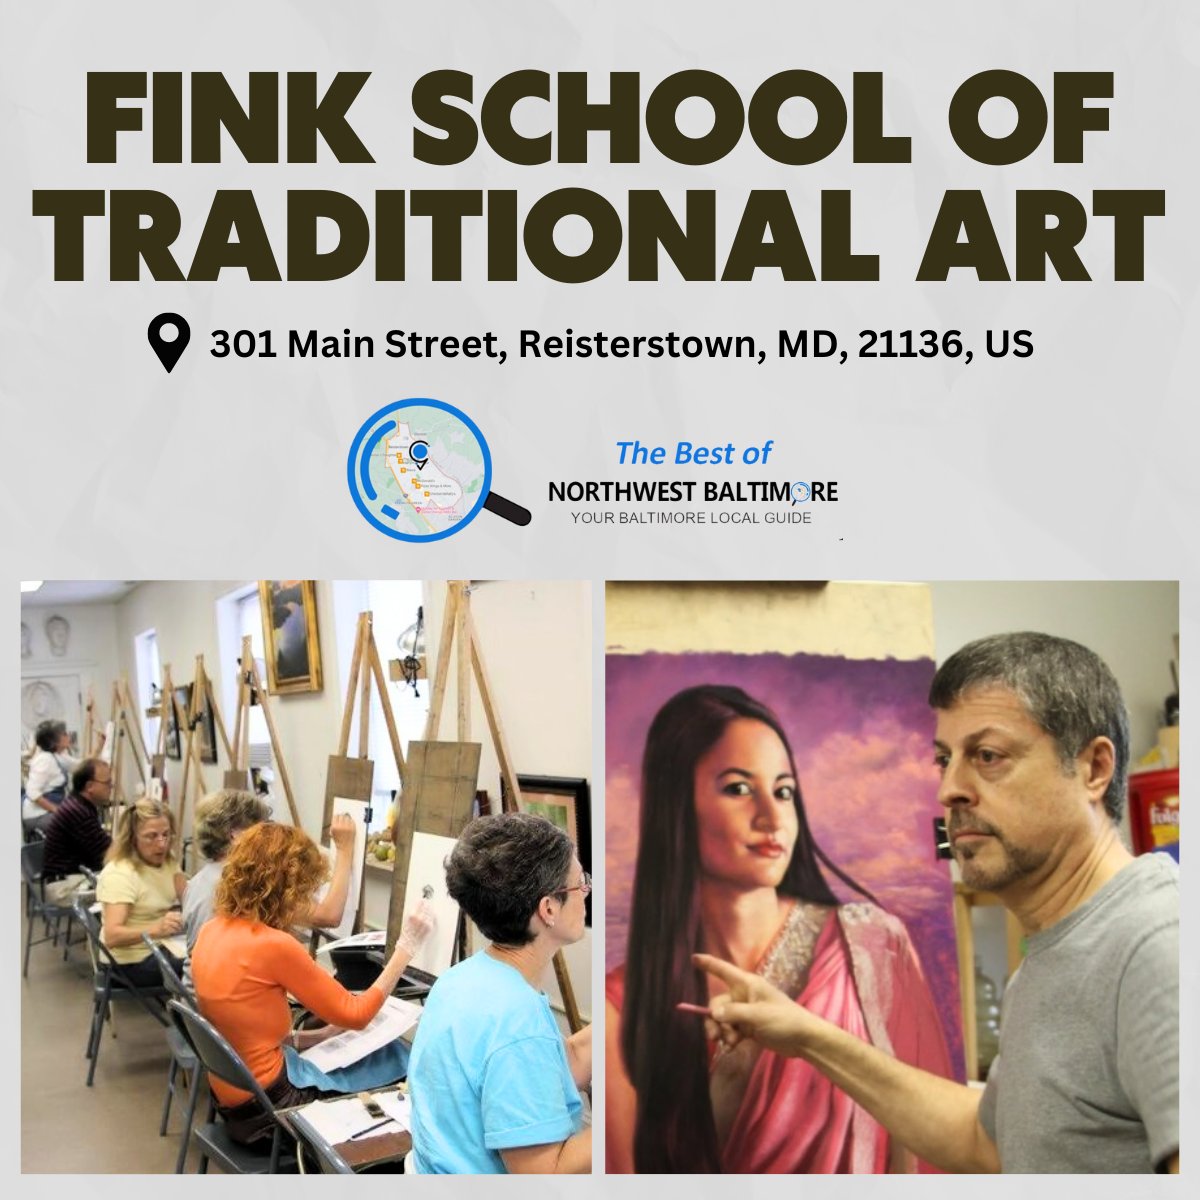 Calling all art enthusiasts! Dive into the world of classical fine art with The Fink School of Traditional Art. #FinkArtSchool #ArtisticExpression
northwestbaltimore.com/listings/fink-… 

#ShopLocal #LiveLocal #LoveLocal #FoodieParadise #MarylandFlavors #SupportLocalBusinesses